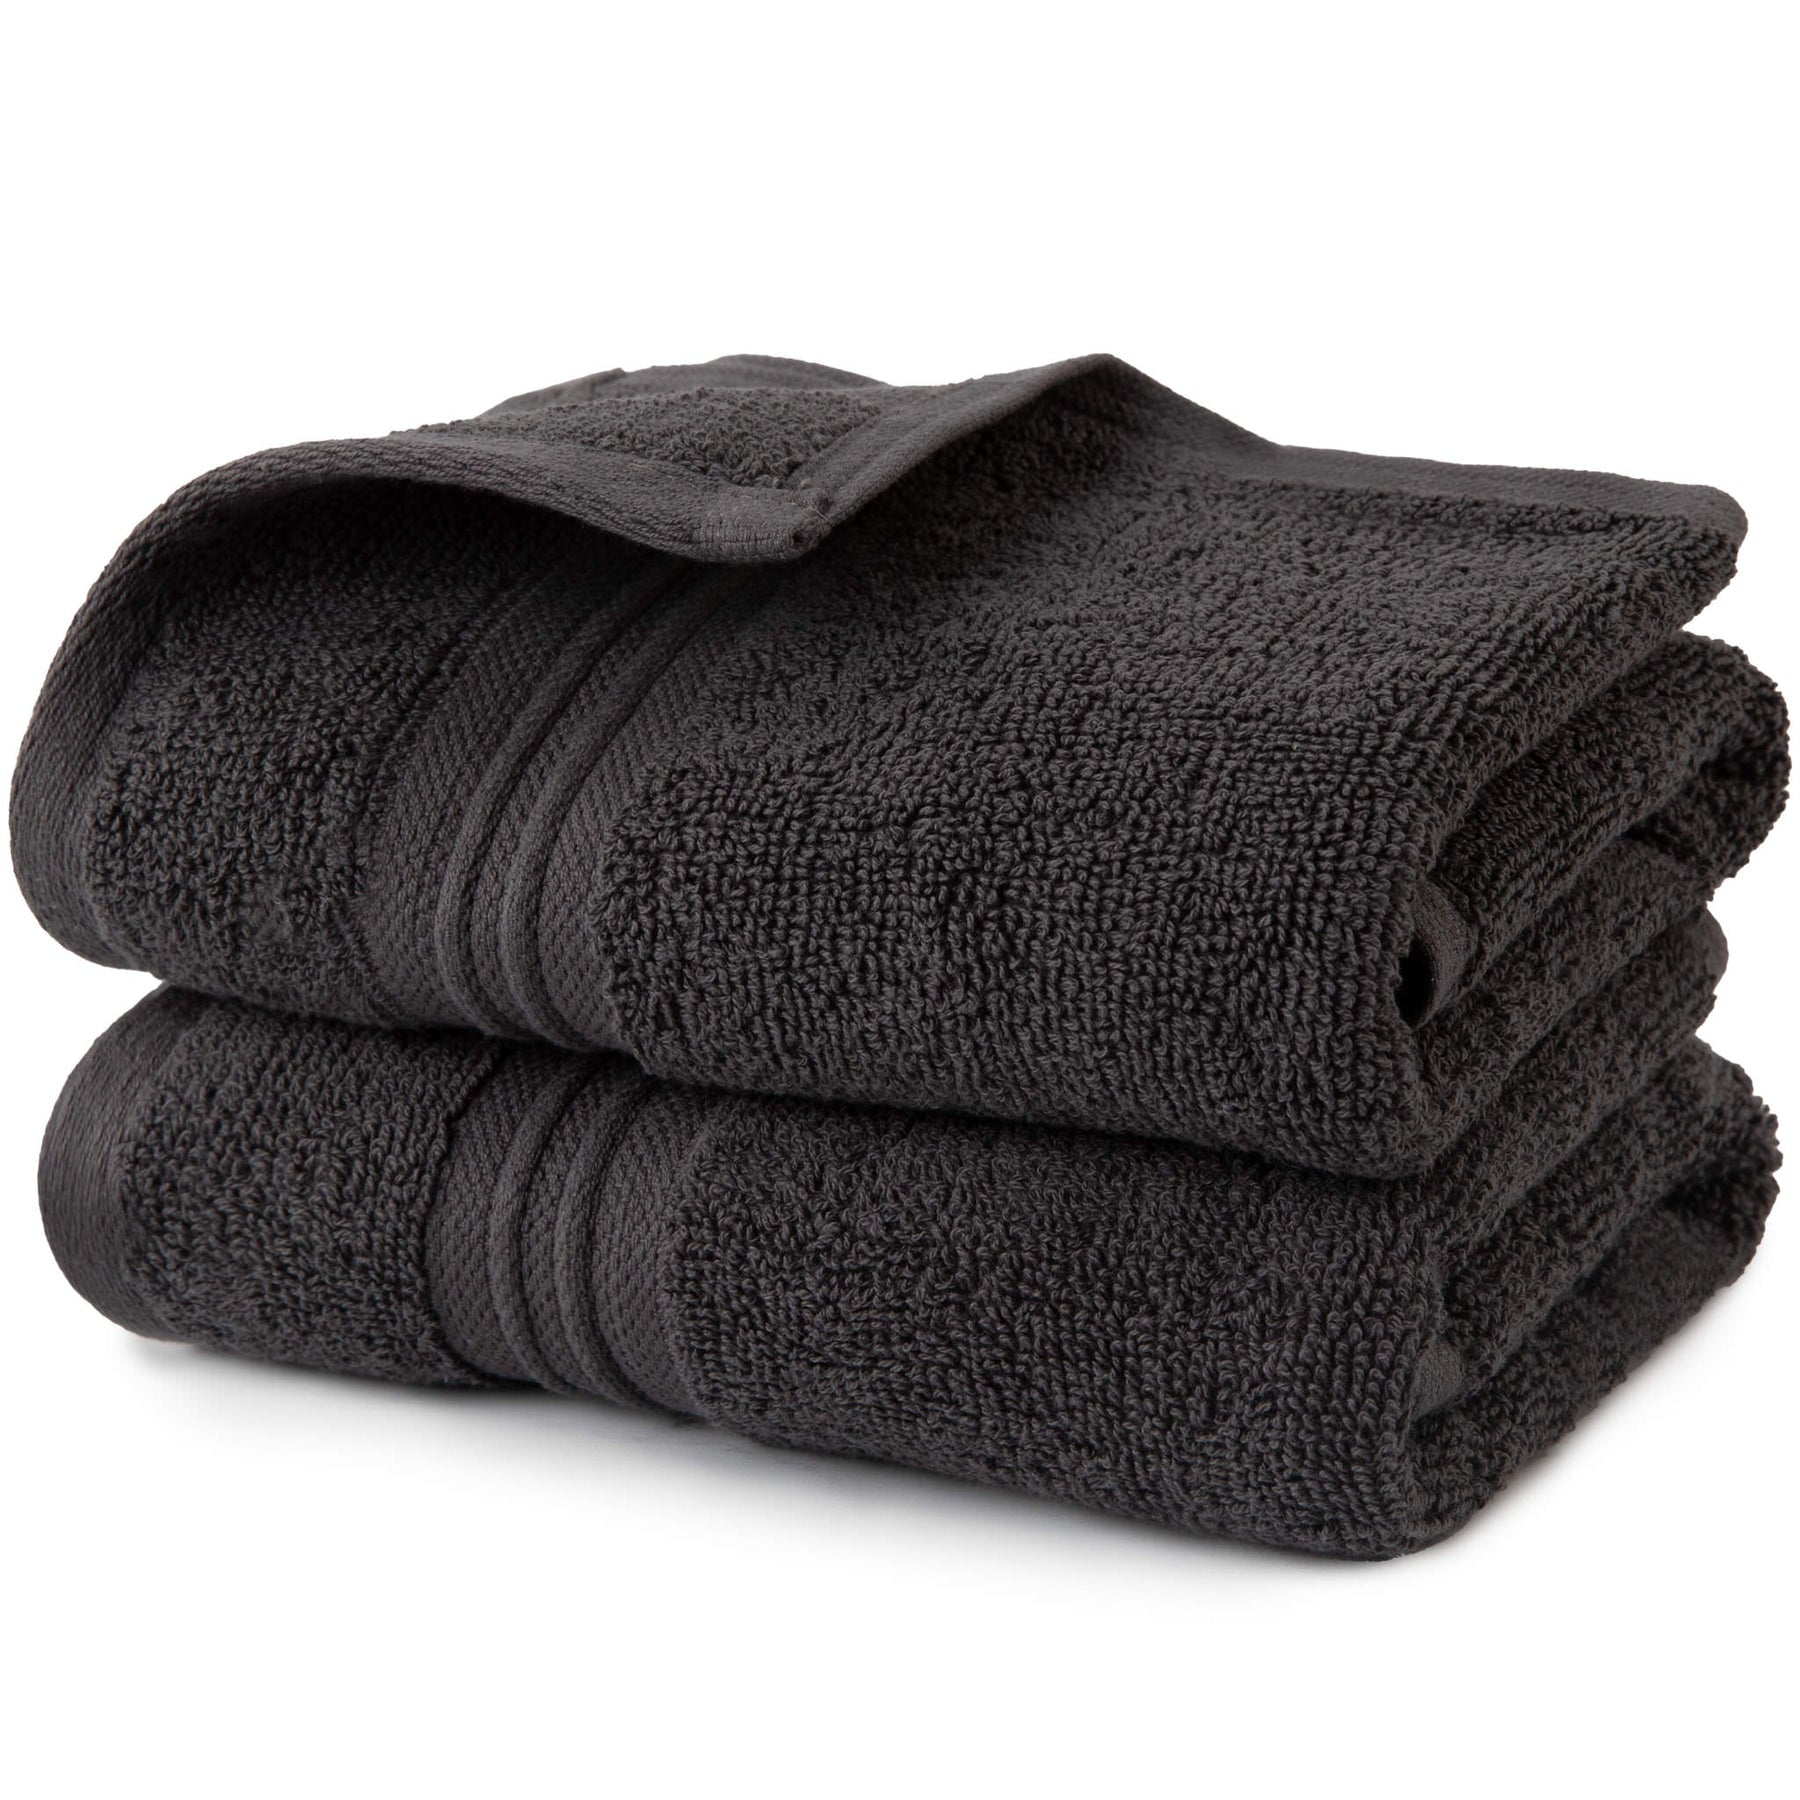 H&M Home - 2-Pack Cotton Terry Guest Towels - Black - Size: 12x20